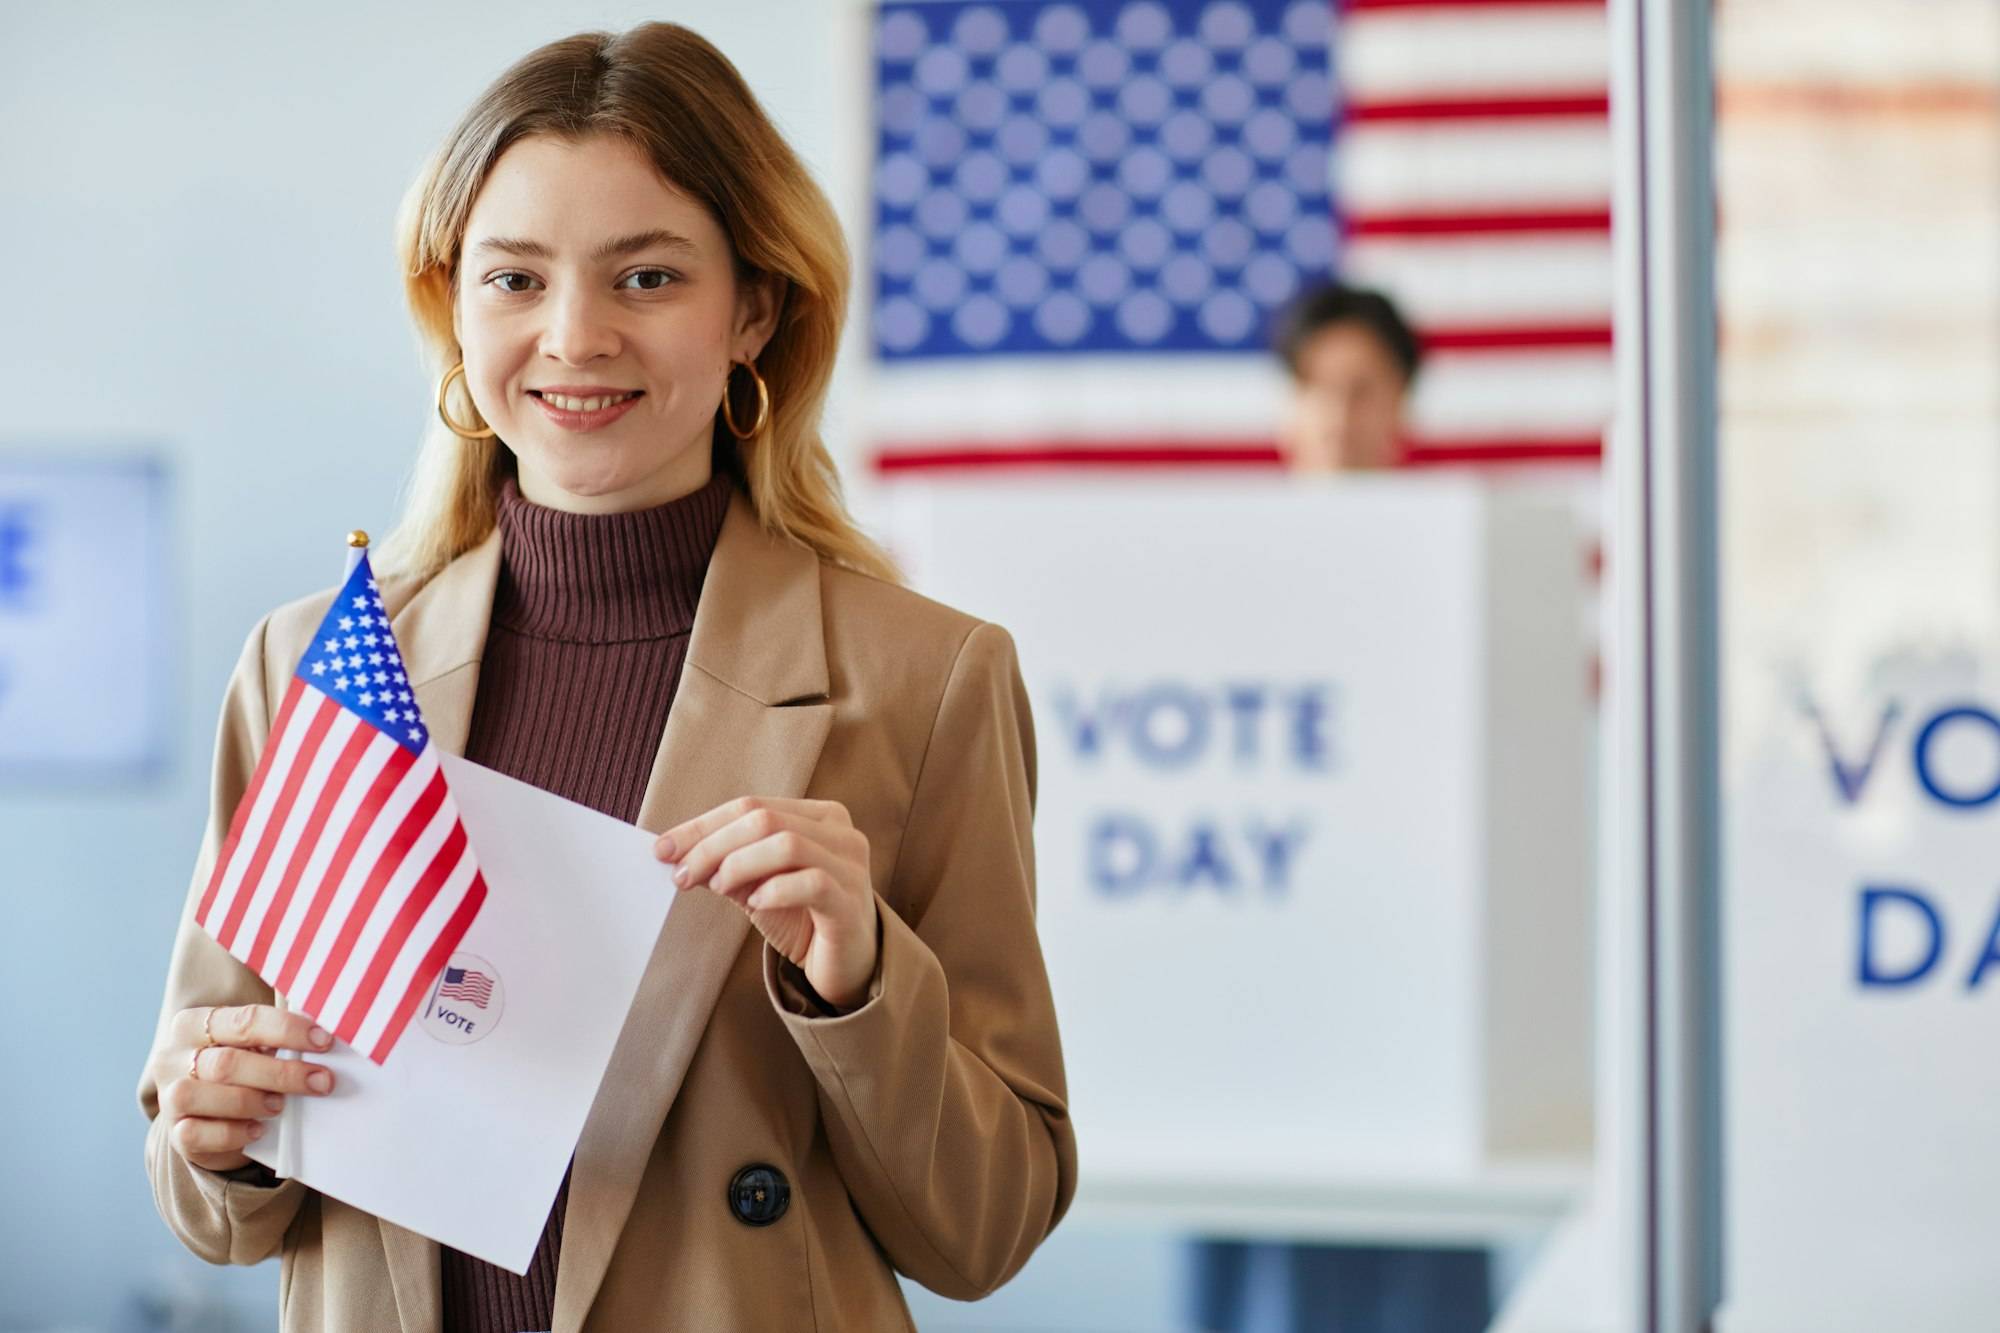 Young Voter in America